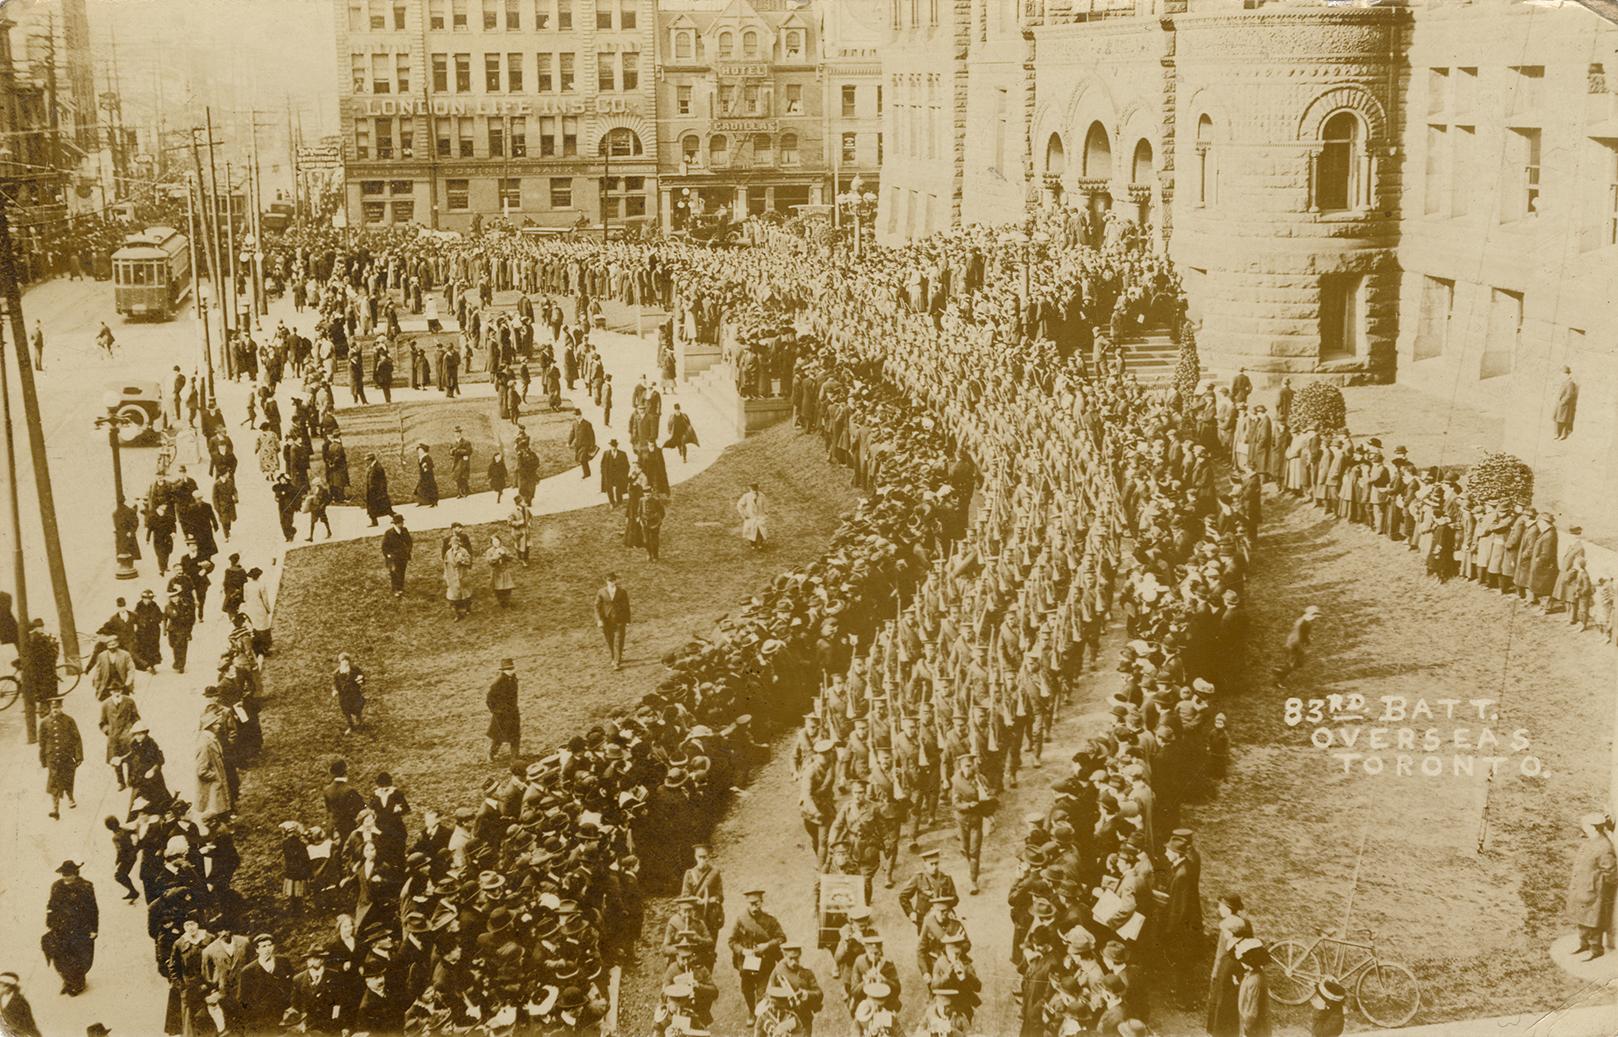 Black and white picture of soldiers marching in front of large, Richardsonian Romanesque buildi ...